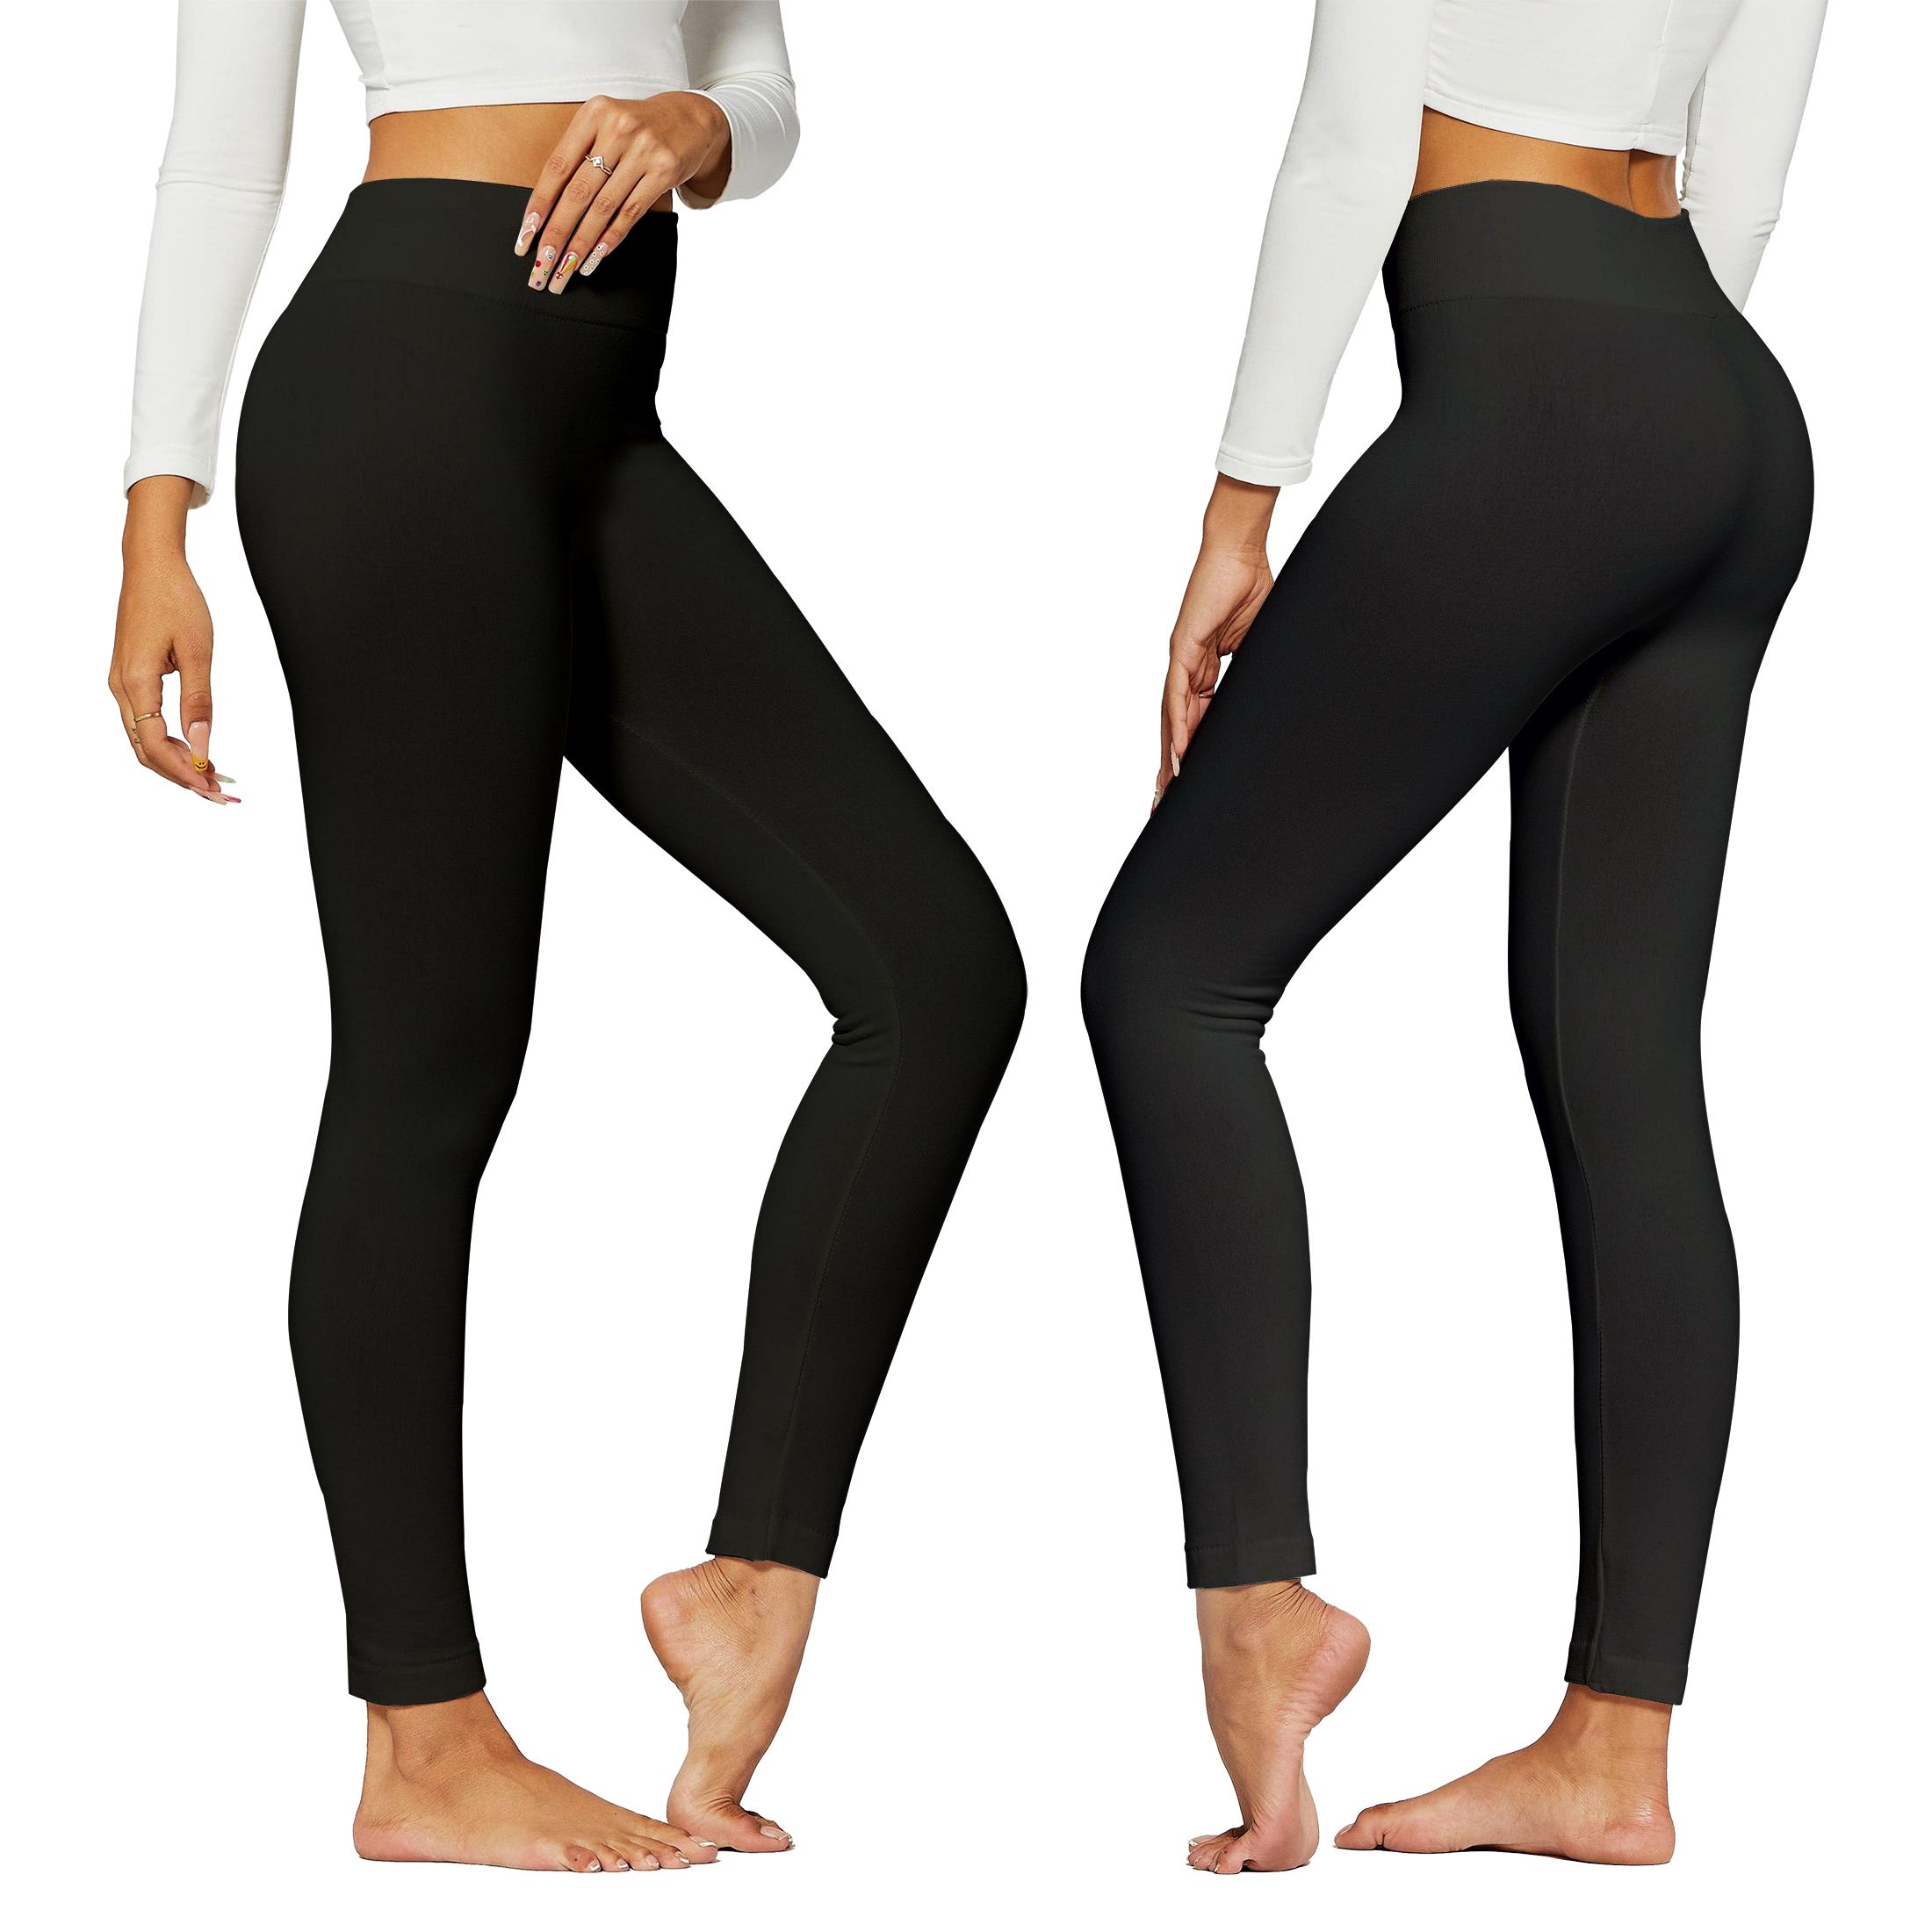 Women's Premium Quality High-Waist Fleece Lined Leggings (Plus Size Available) - Brown, Large/X-Large